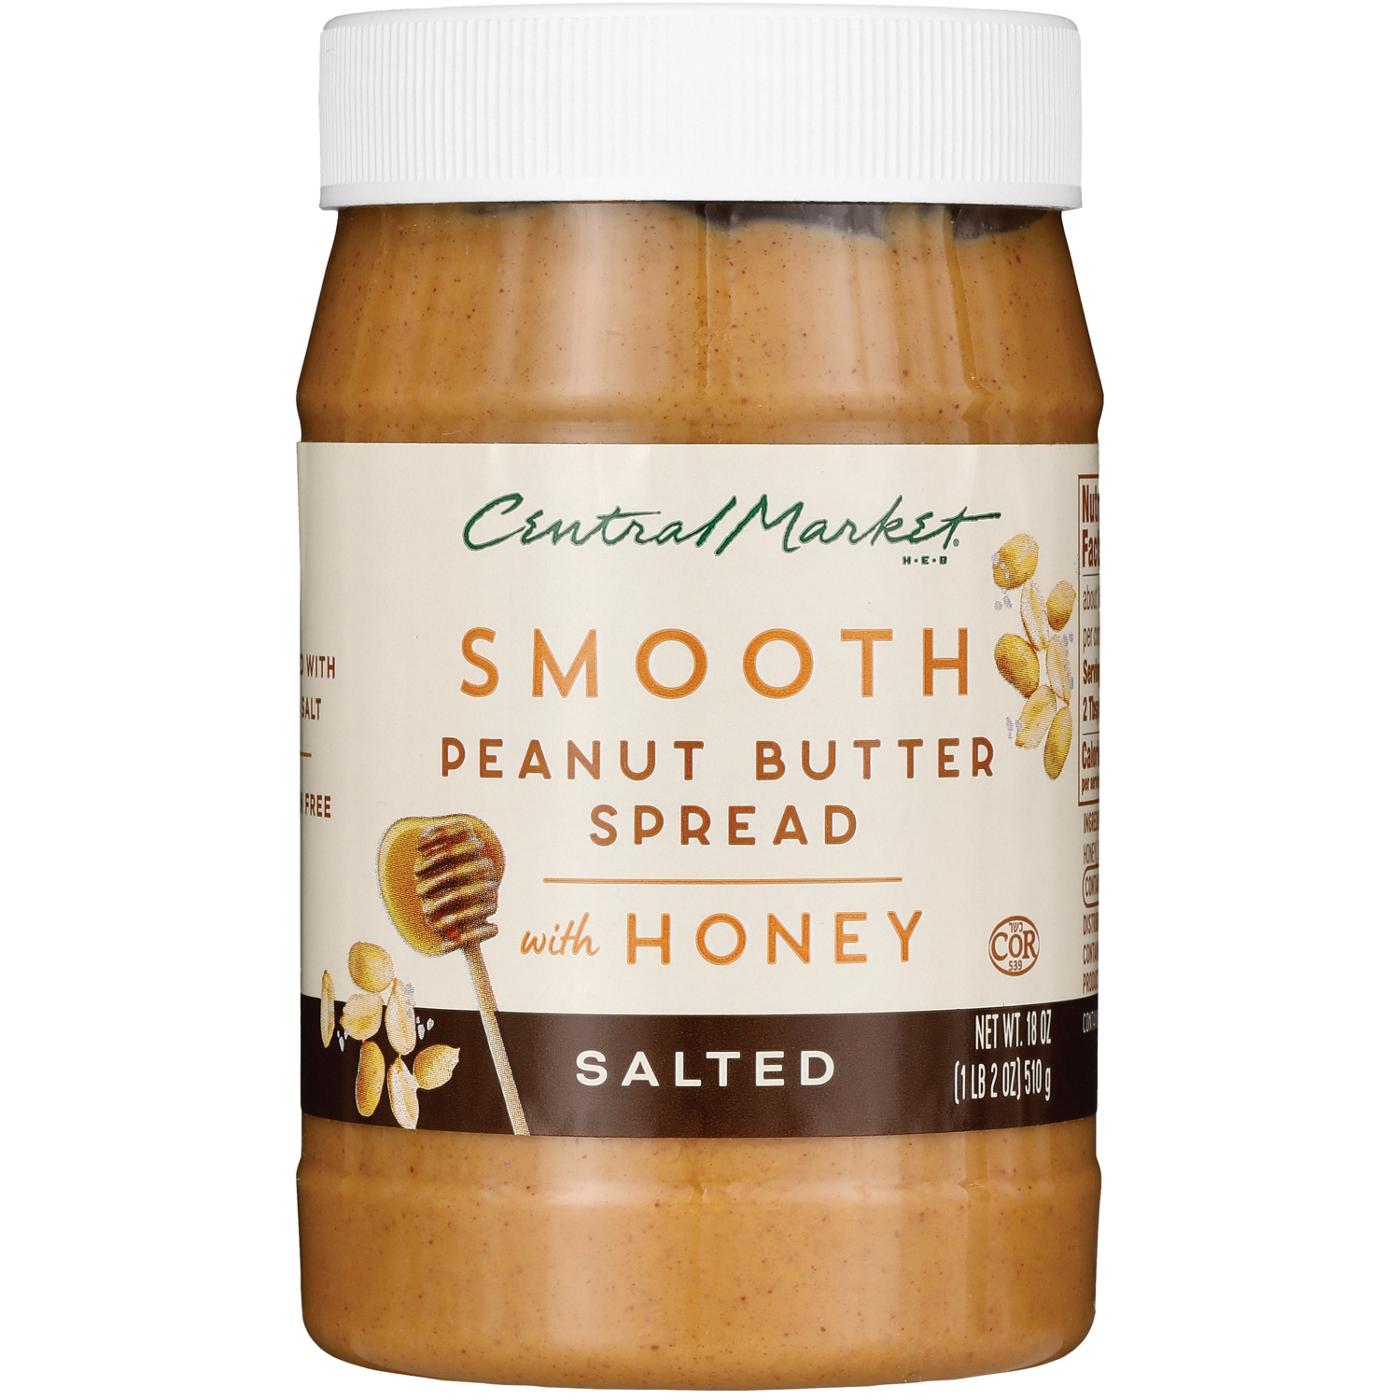 Central Market Smooth Peanut Butter with Honey - Salted; image 1 of 2